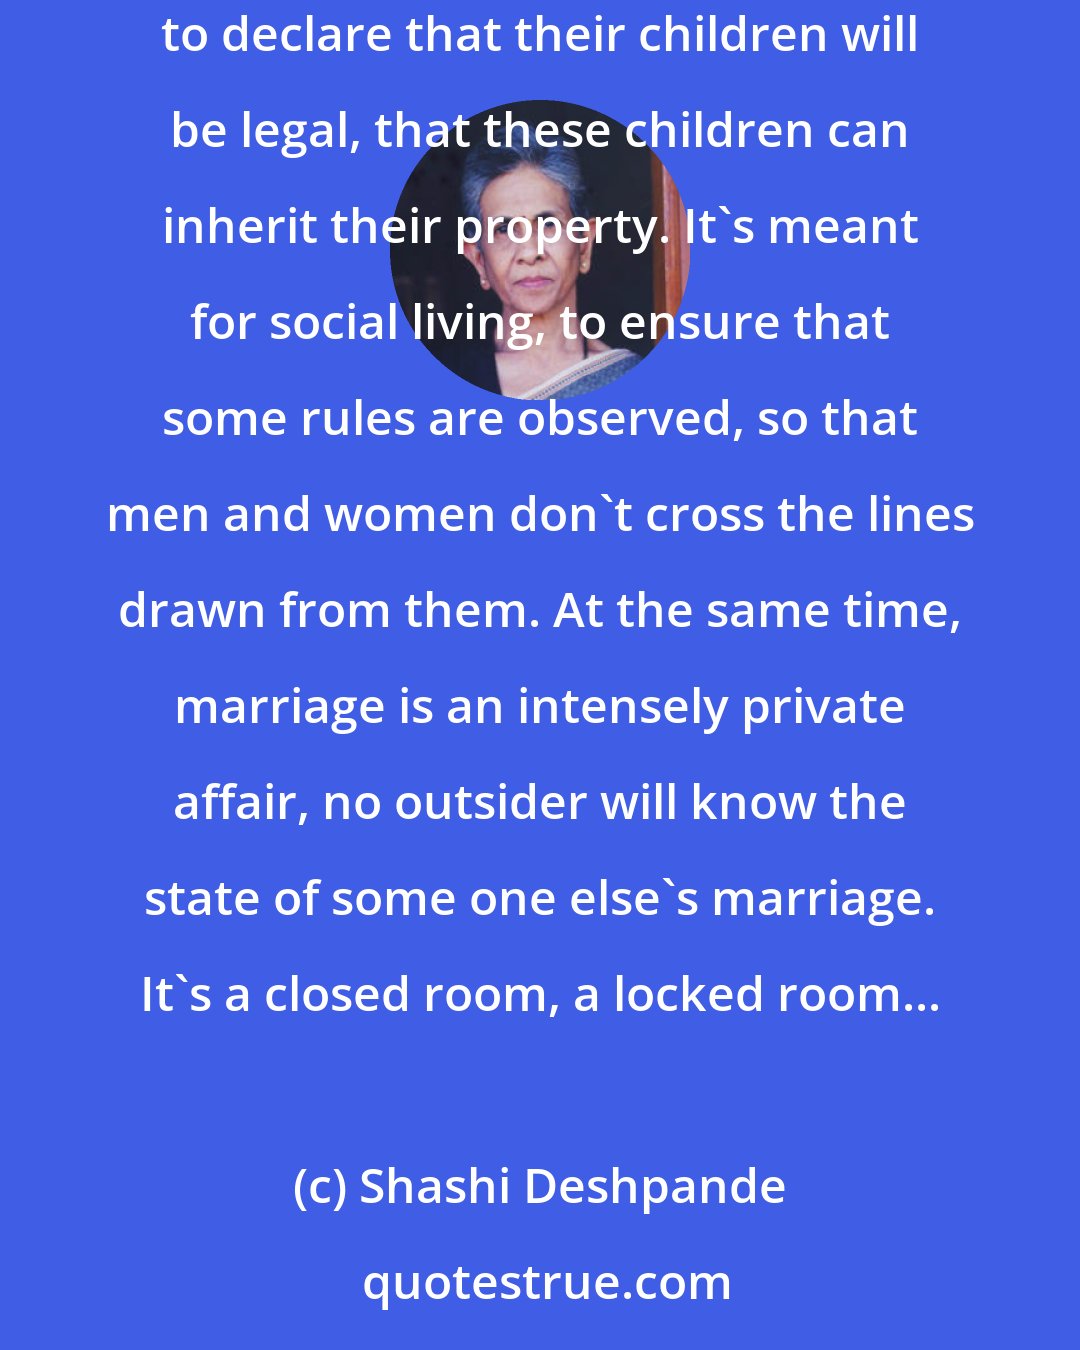 Shashi Deshpande: Marriage is a very strange thing. It's a very public institution, it's meant to tell the world that two people are going to live together, to declare that their children will be legal, that these children can inherit their property. It's meant for social living, to ensure that some rules are observed, so that men and women don't cross the lines drawn from them. At the same time, marriage is an intensely private affair, no outsider will know the state of some one else's marriage. It's a closed room, a locked room...